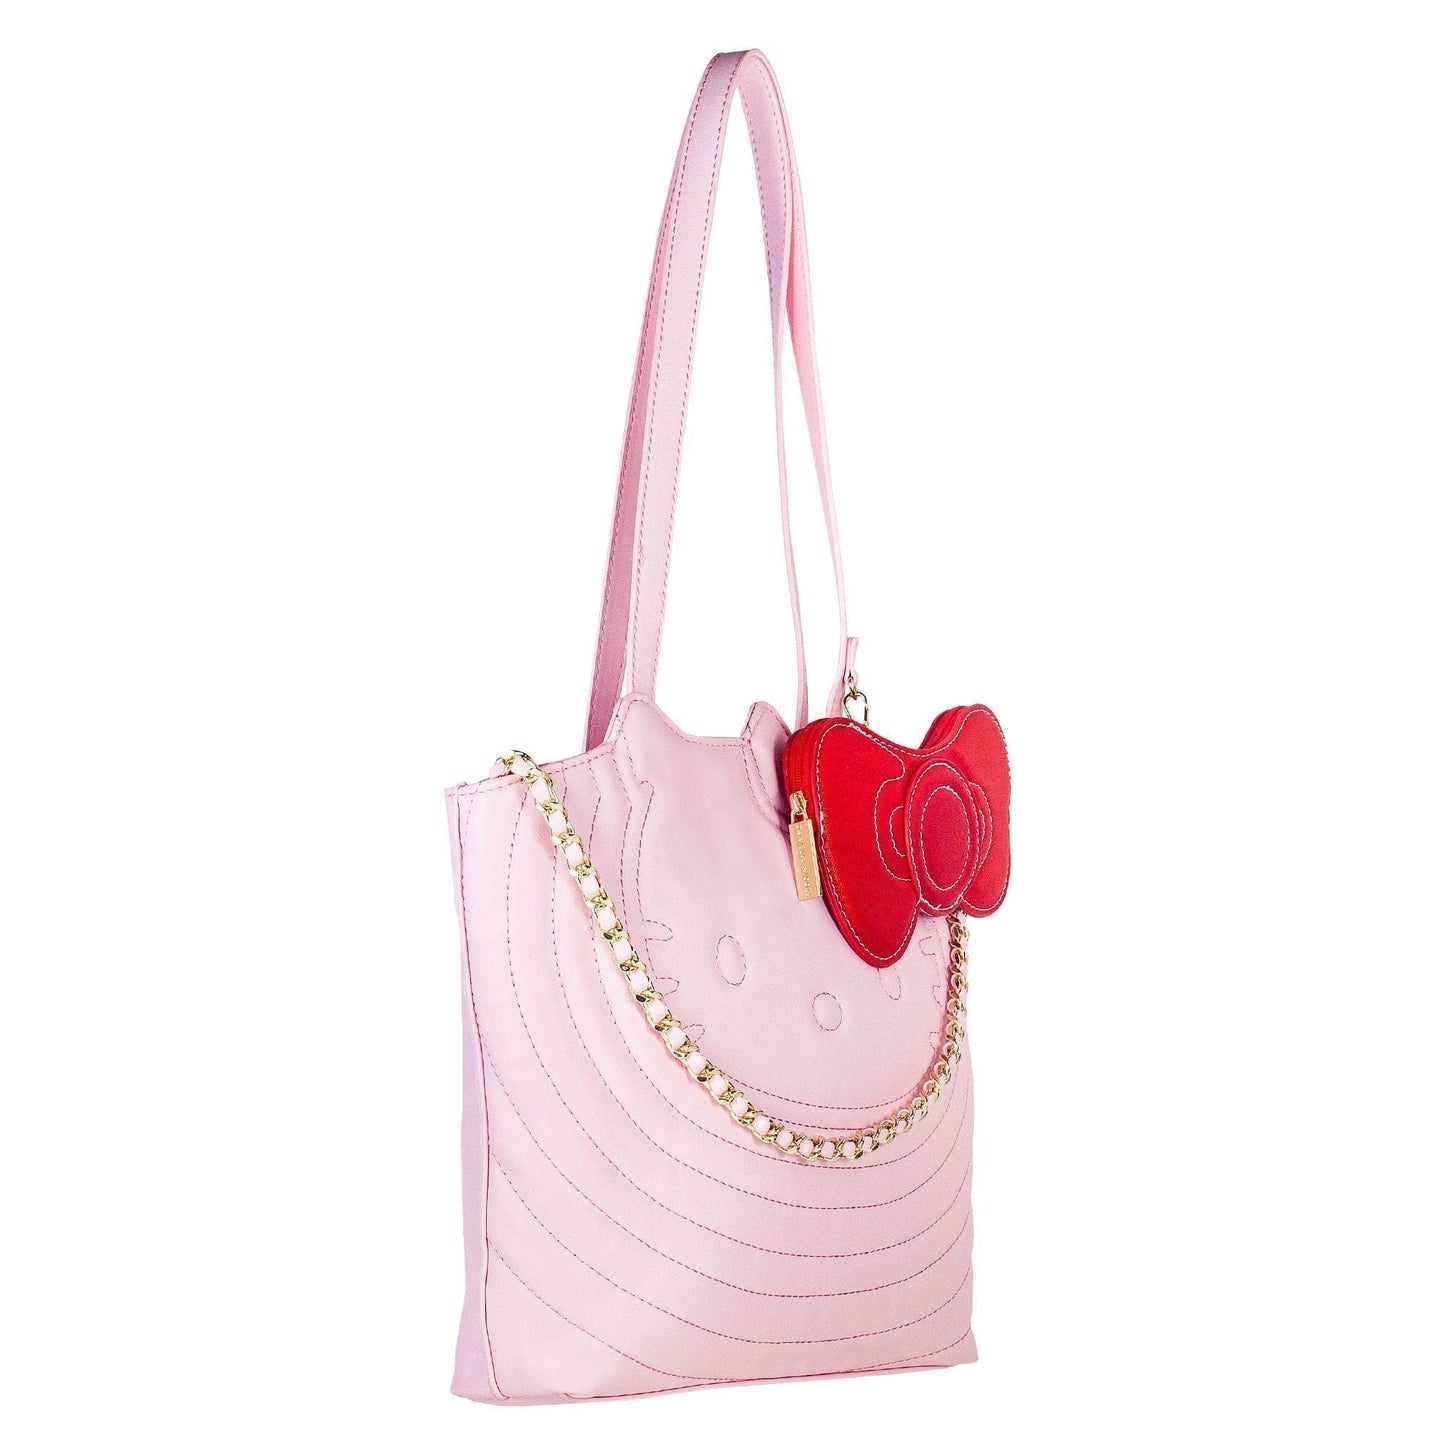 Danielle Nicole Hello Kitty Pink Quilted Shoulder Bag